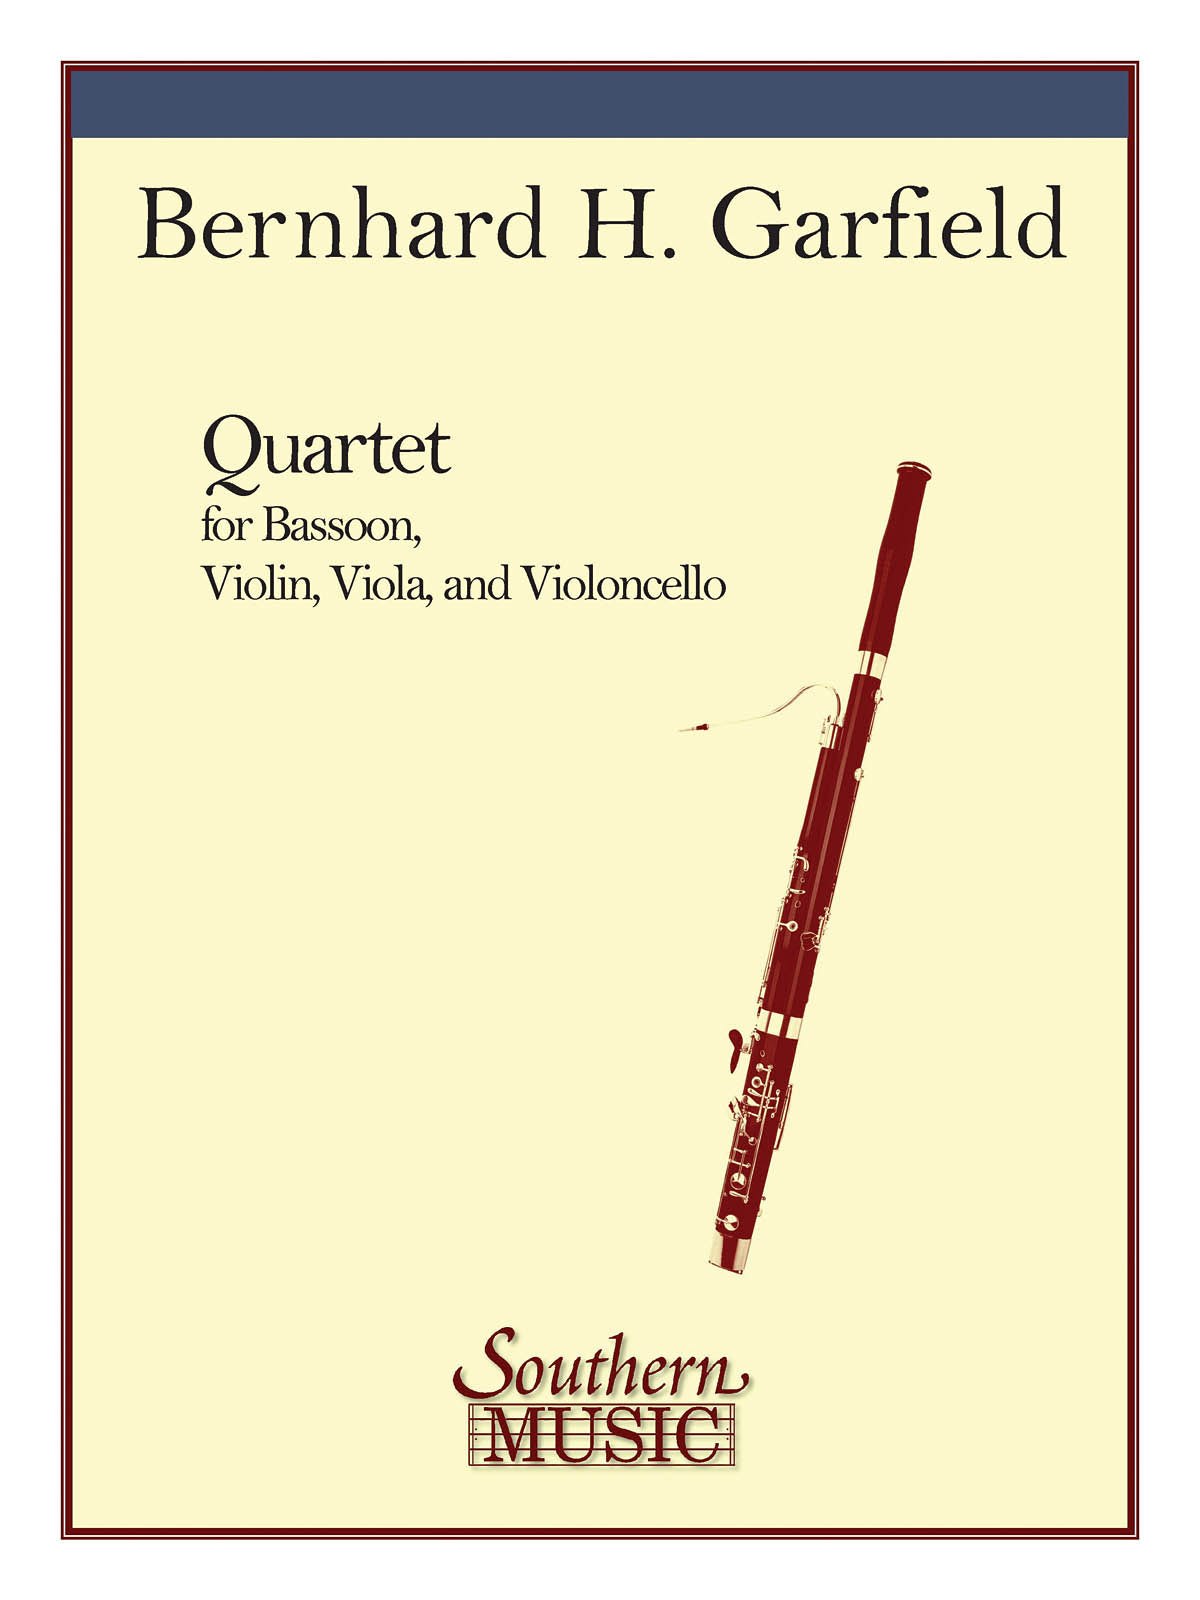 Garfield: Quartet for String Trio with Bassoon